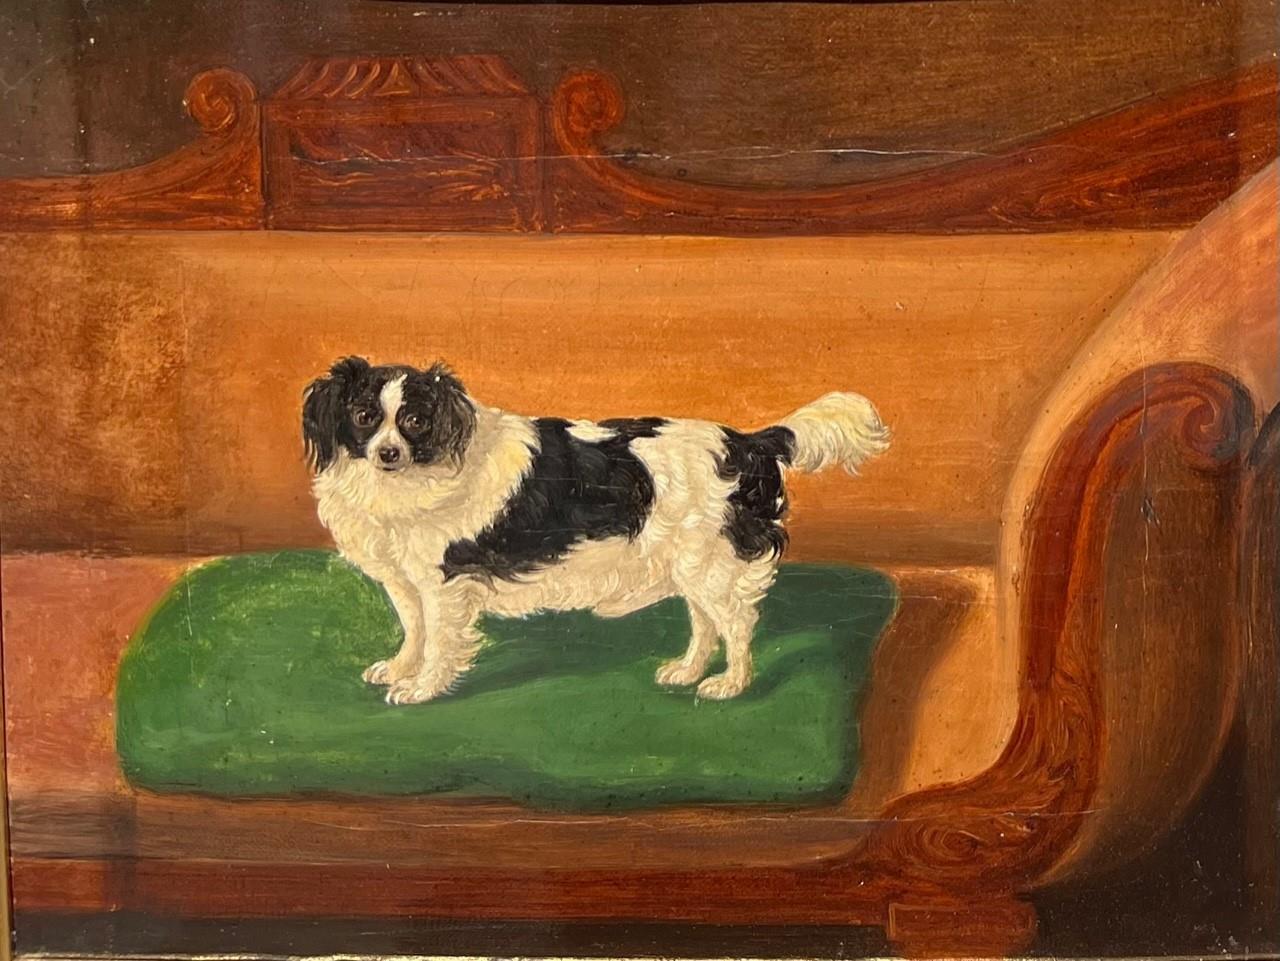 AN EARLY 19TH CENTURY OIL ON CANVAS, PORTRAIT OF AN ENGLISH SPANIEL Seated on a regency settee, held